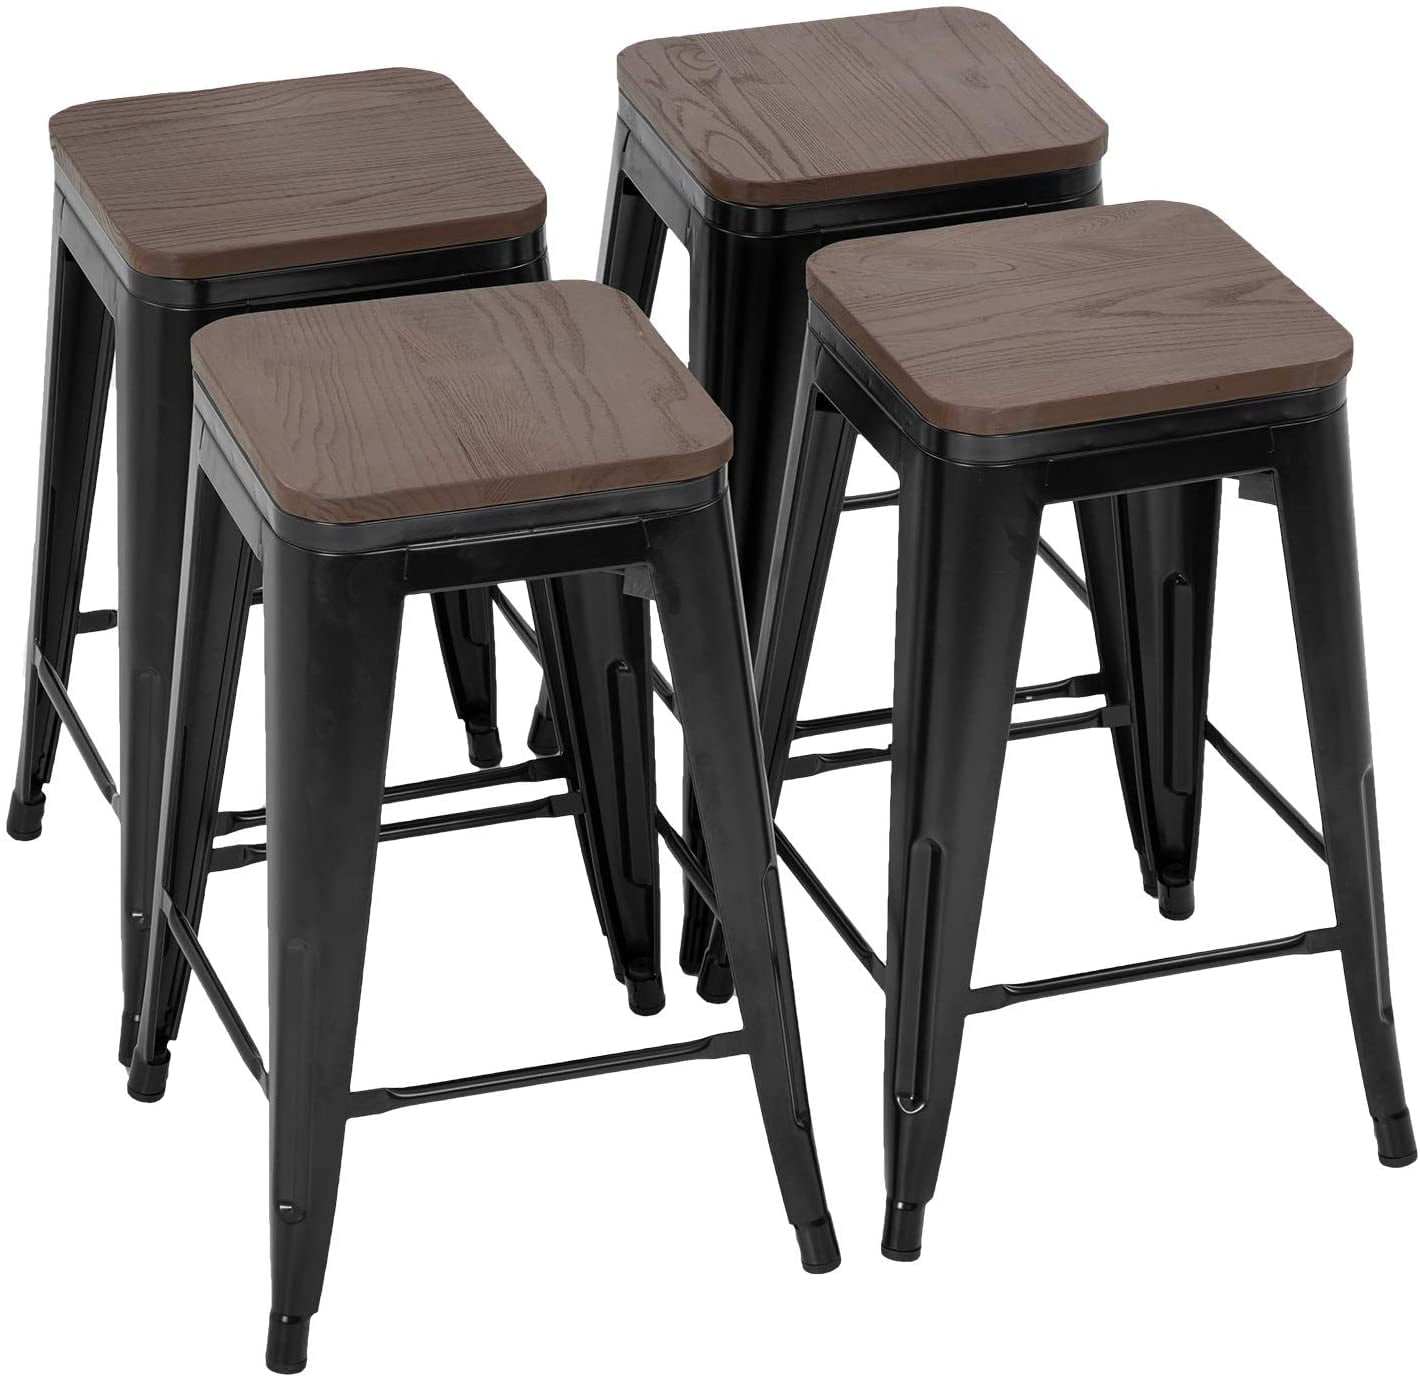 High-quality Bar Stools Seat Metal Counter Height Chair Black 